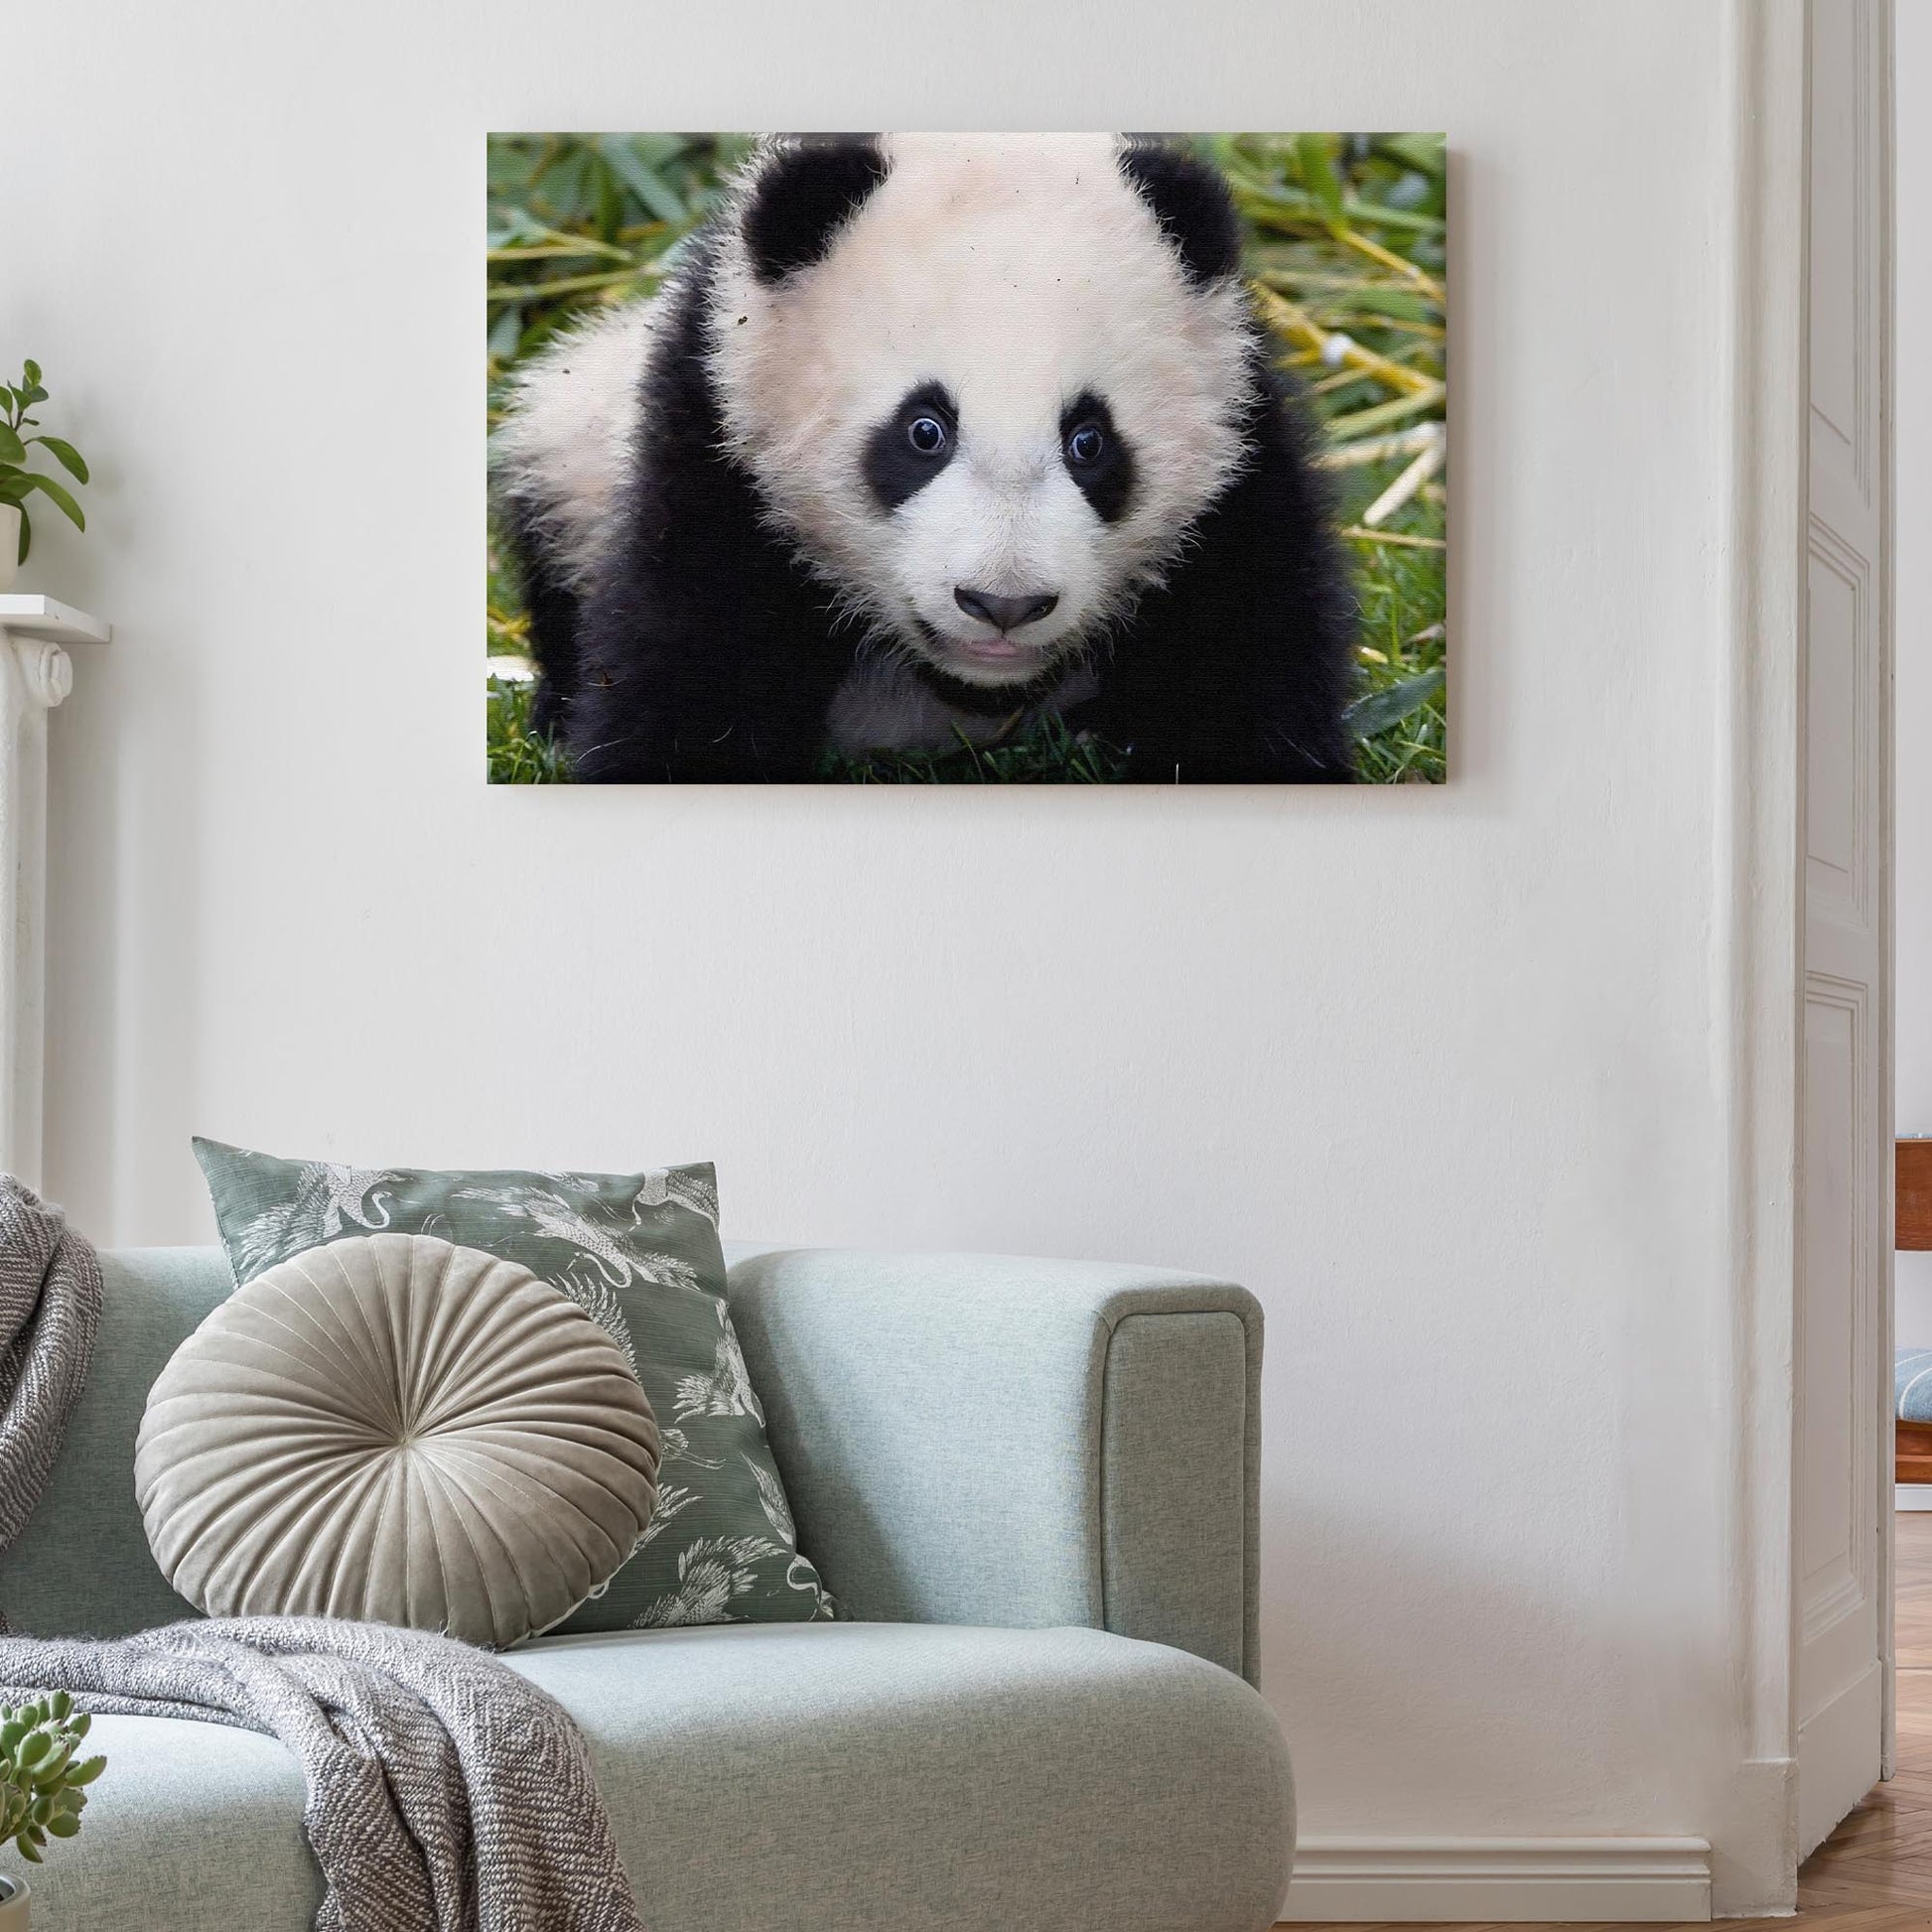 Surprised Panda in the Woods  Canvas Wall Art